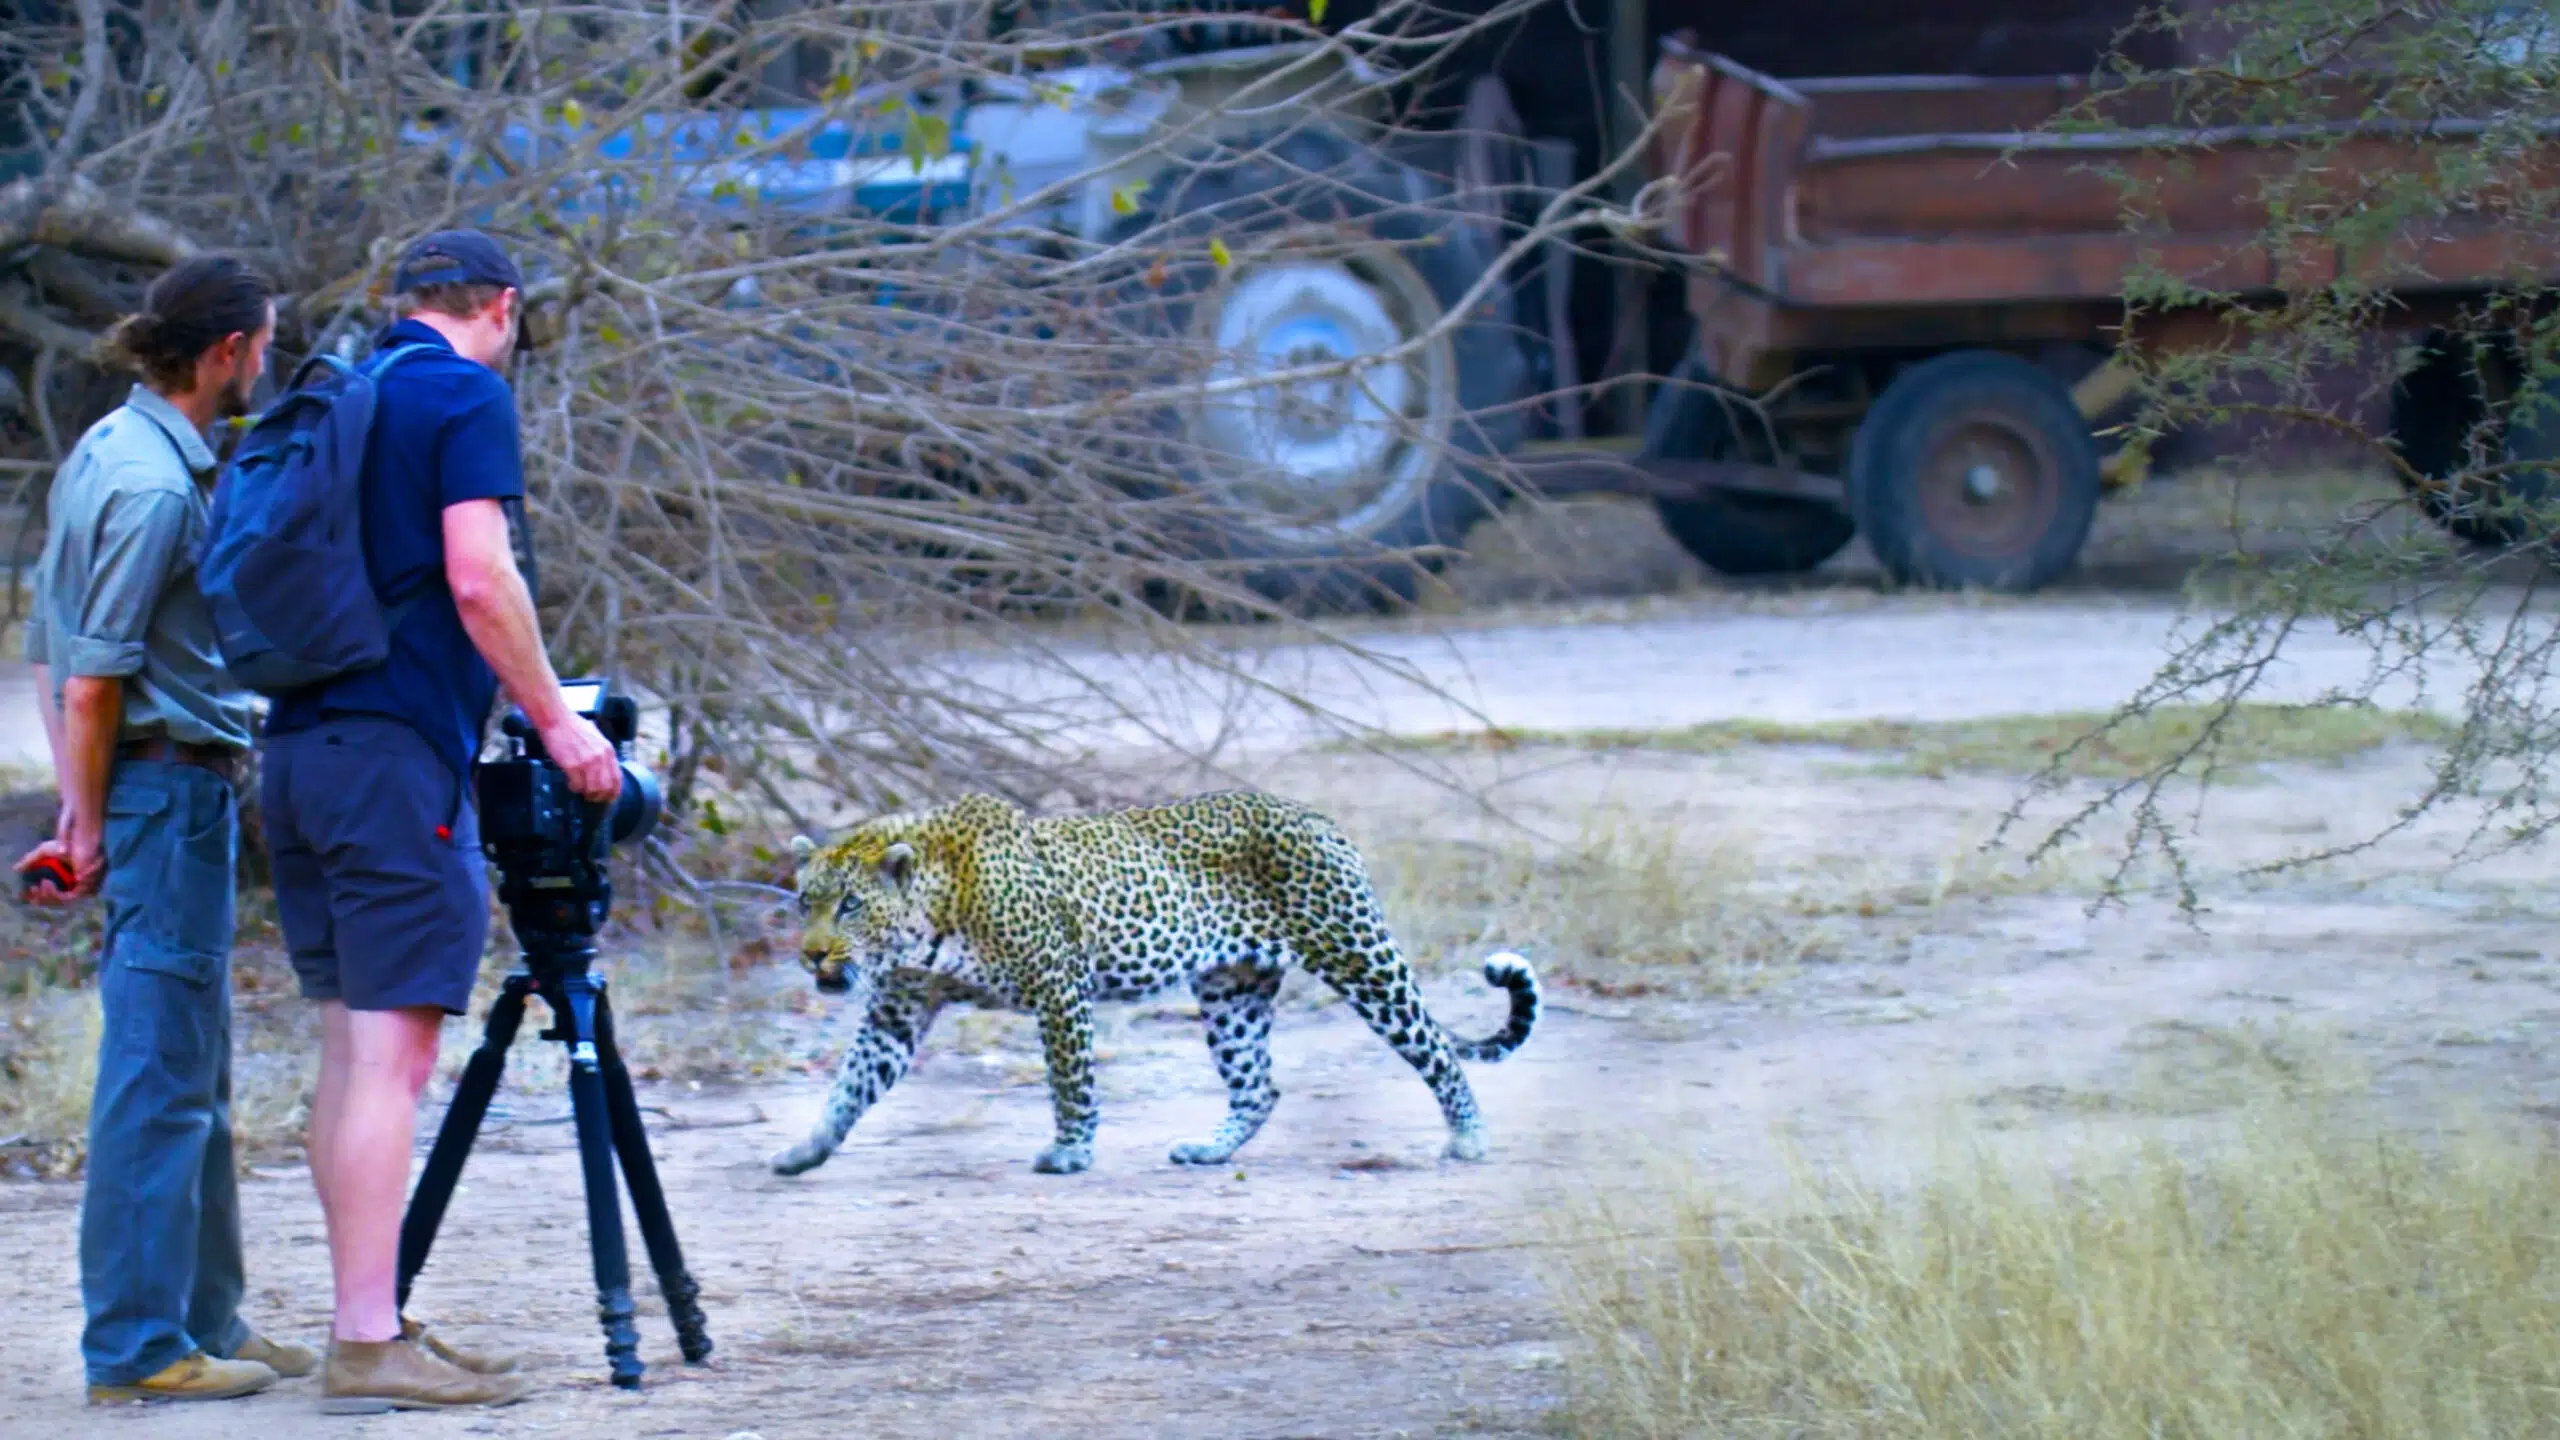 Leopard Walks Right up to Film-Makers (Showing They Don’t Need Big Lenses 😂)